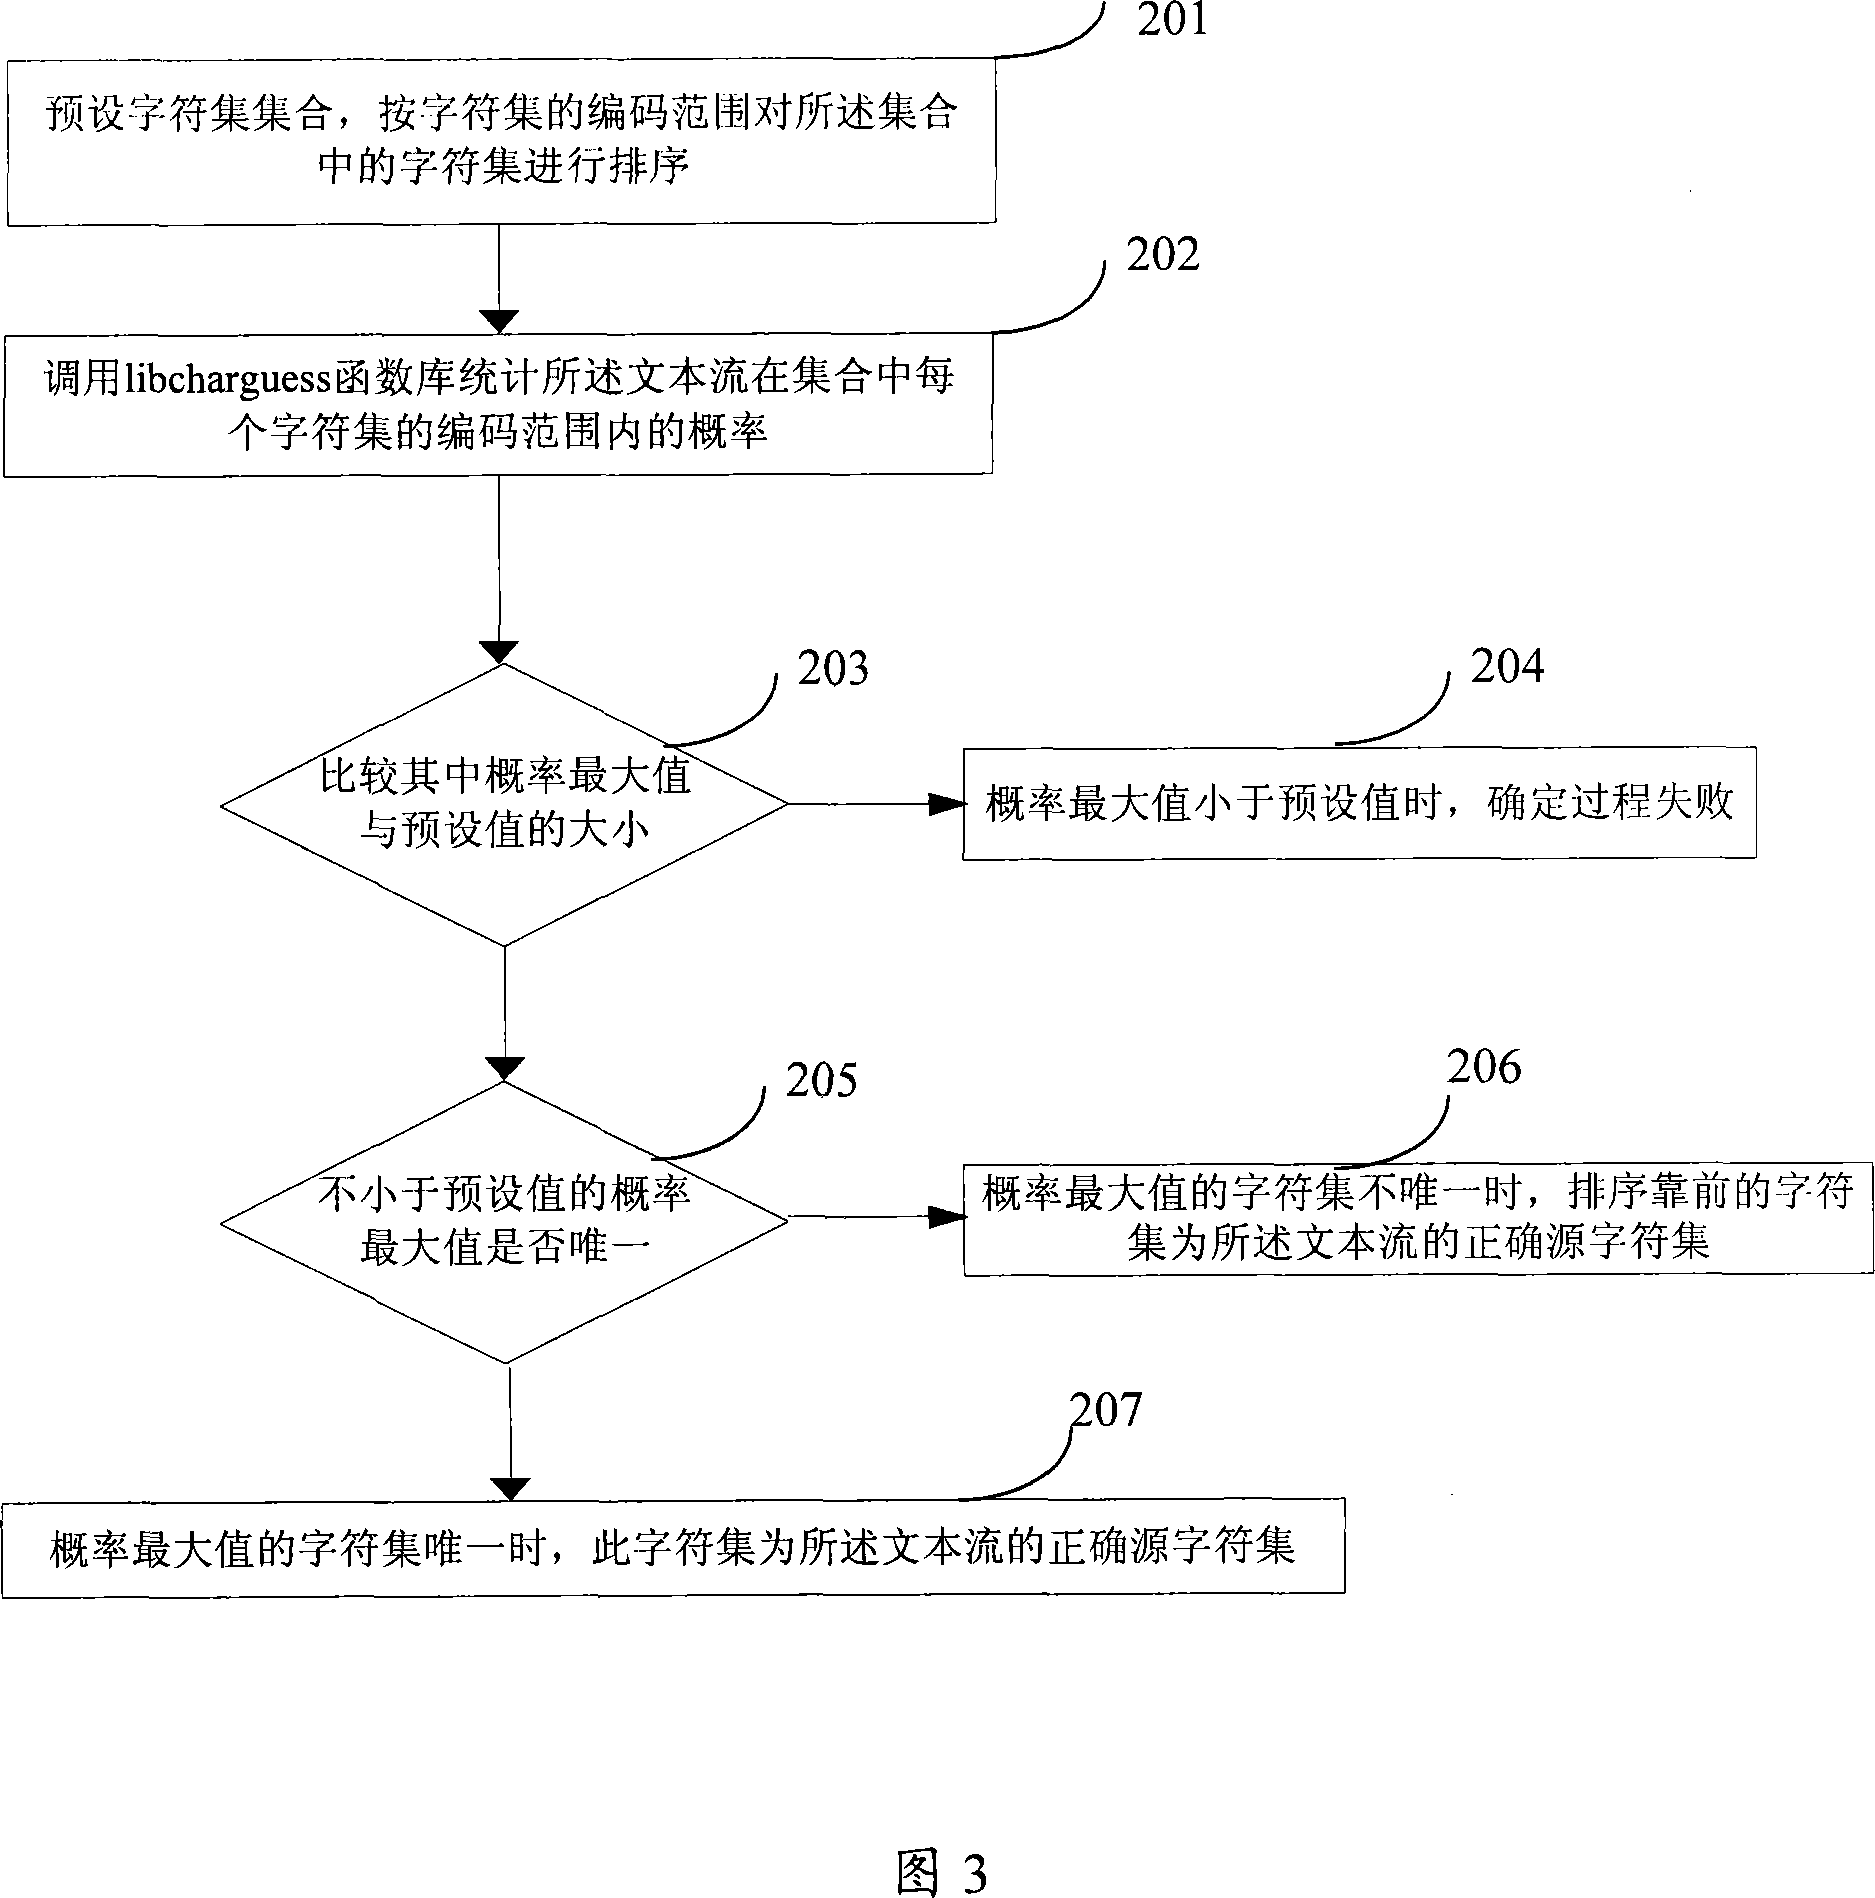 Method and apparatus for confirming text stream character set